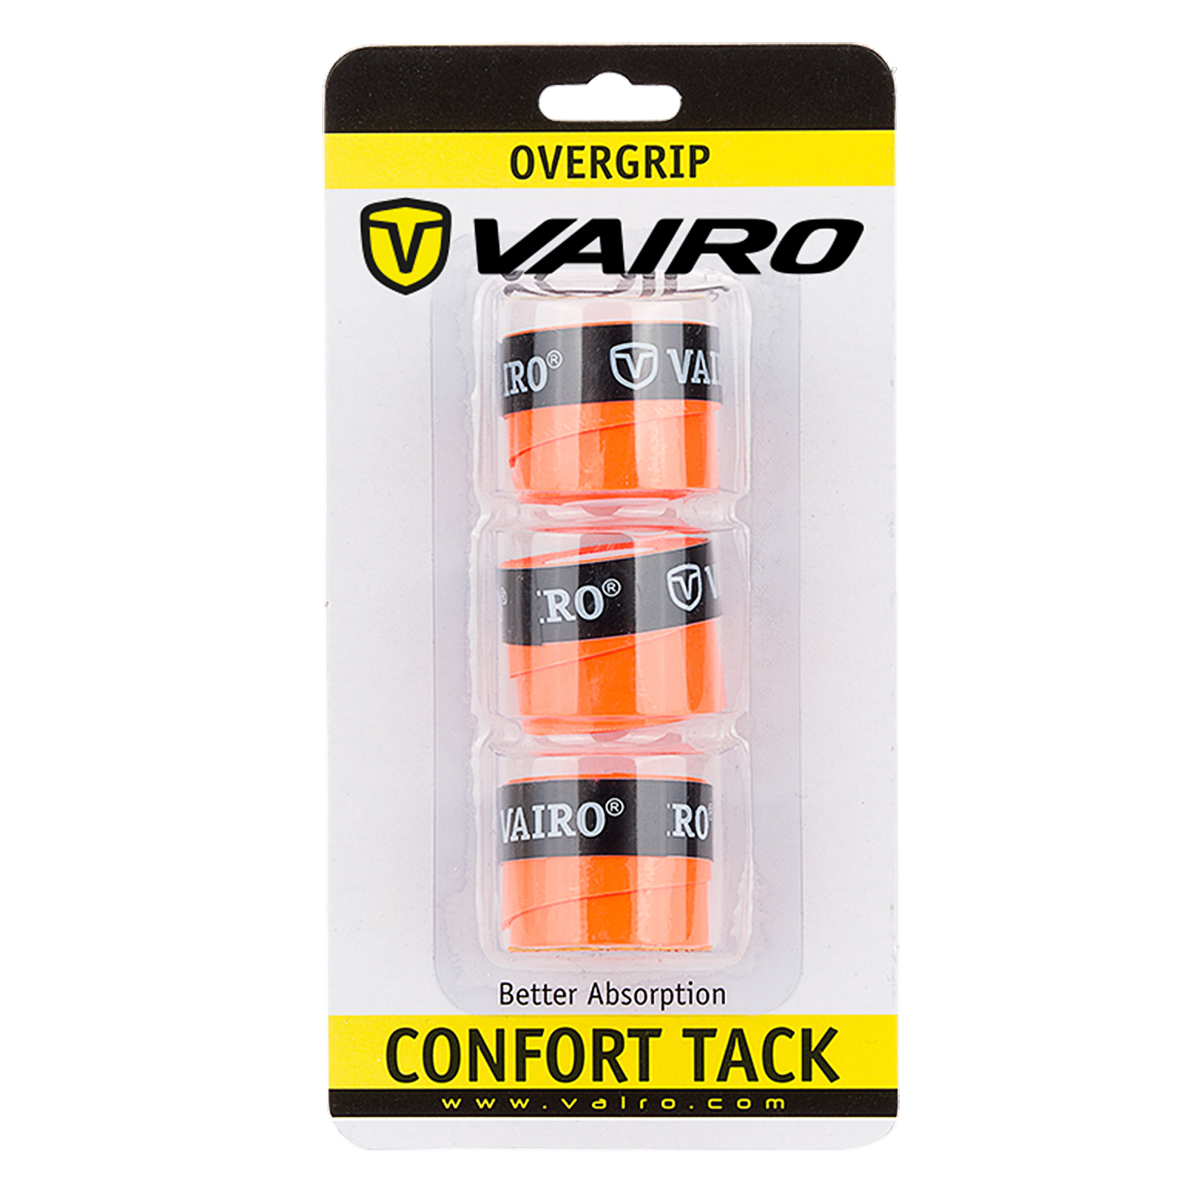 Cubre Grips Vairo Confort Tack X3,  image number null